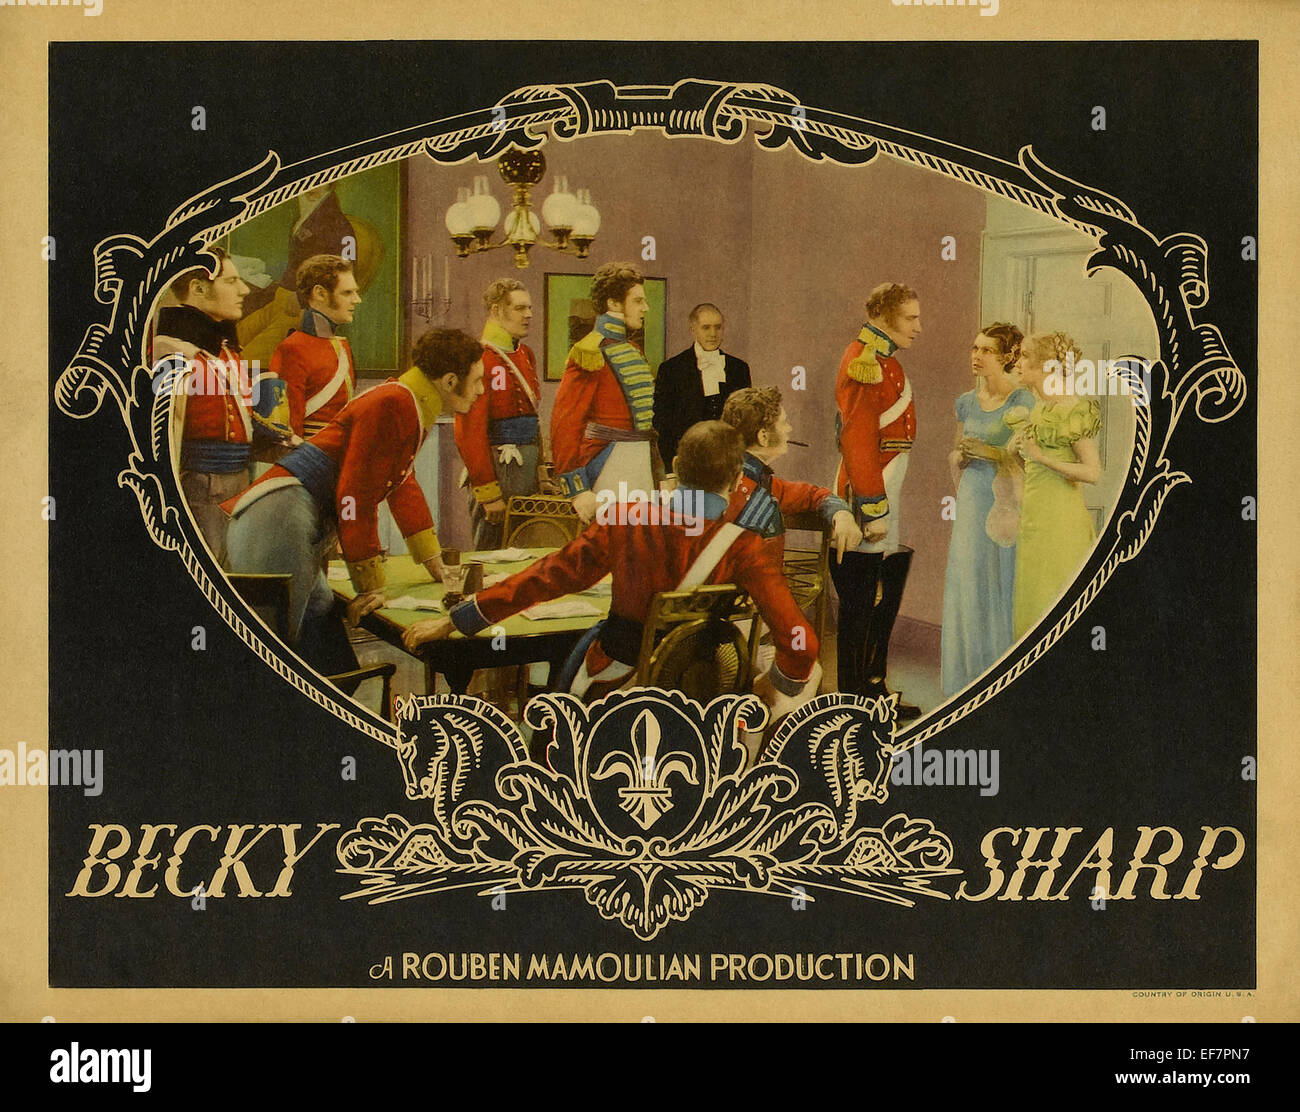 Becky Sharp - Movie Poster Banque D'Images